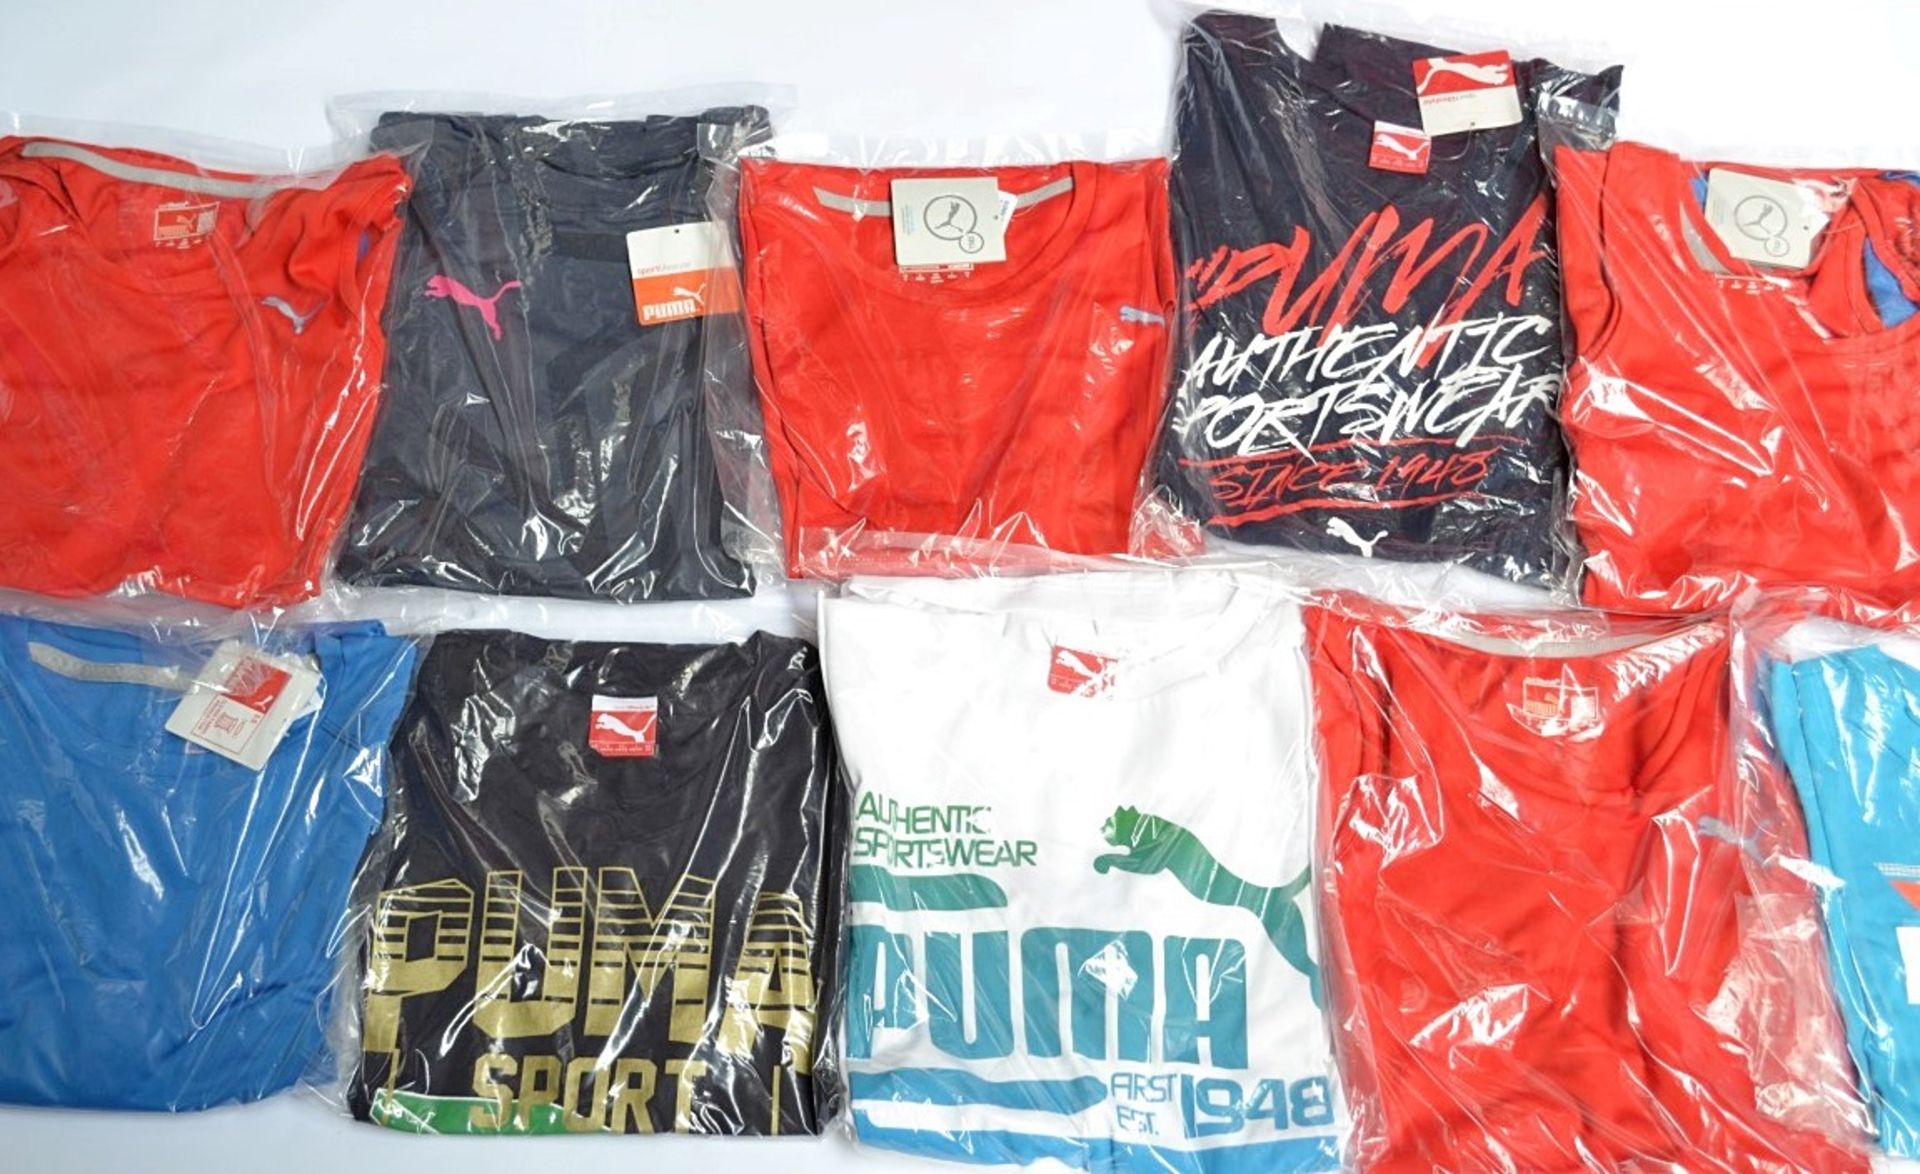 10 x Assorted PUMA Branded T-Shirts & Vests - Size: All Adult Medium - New With Tags - CL155 -